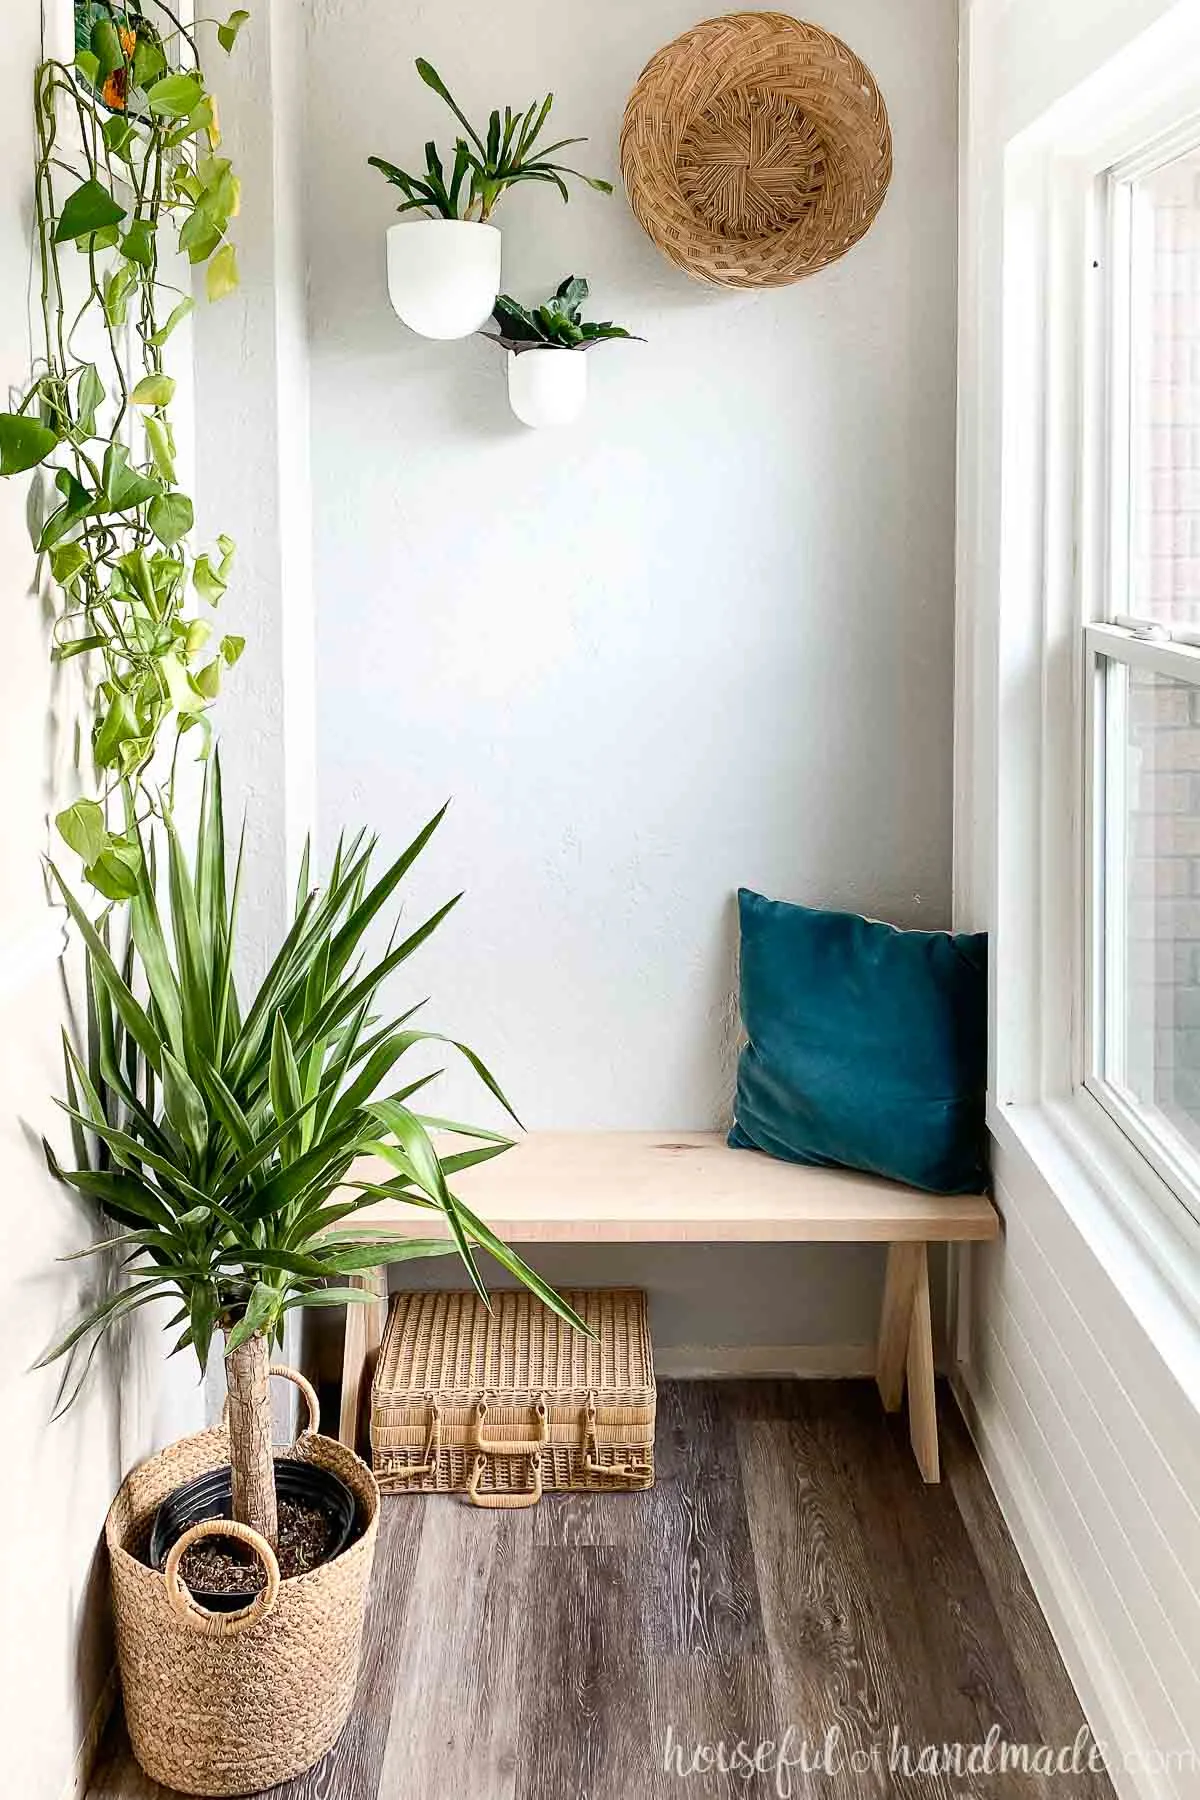 Entry nook with lots of houseplants hanging around the DIY bench with a wicker suitcase tucked underneath.